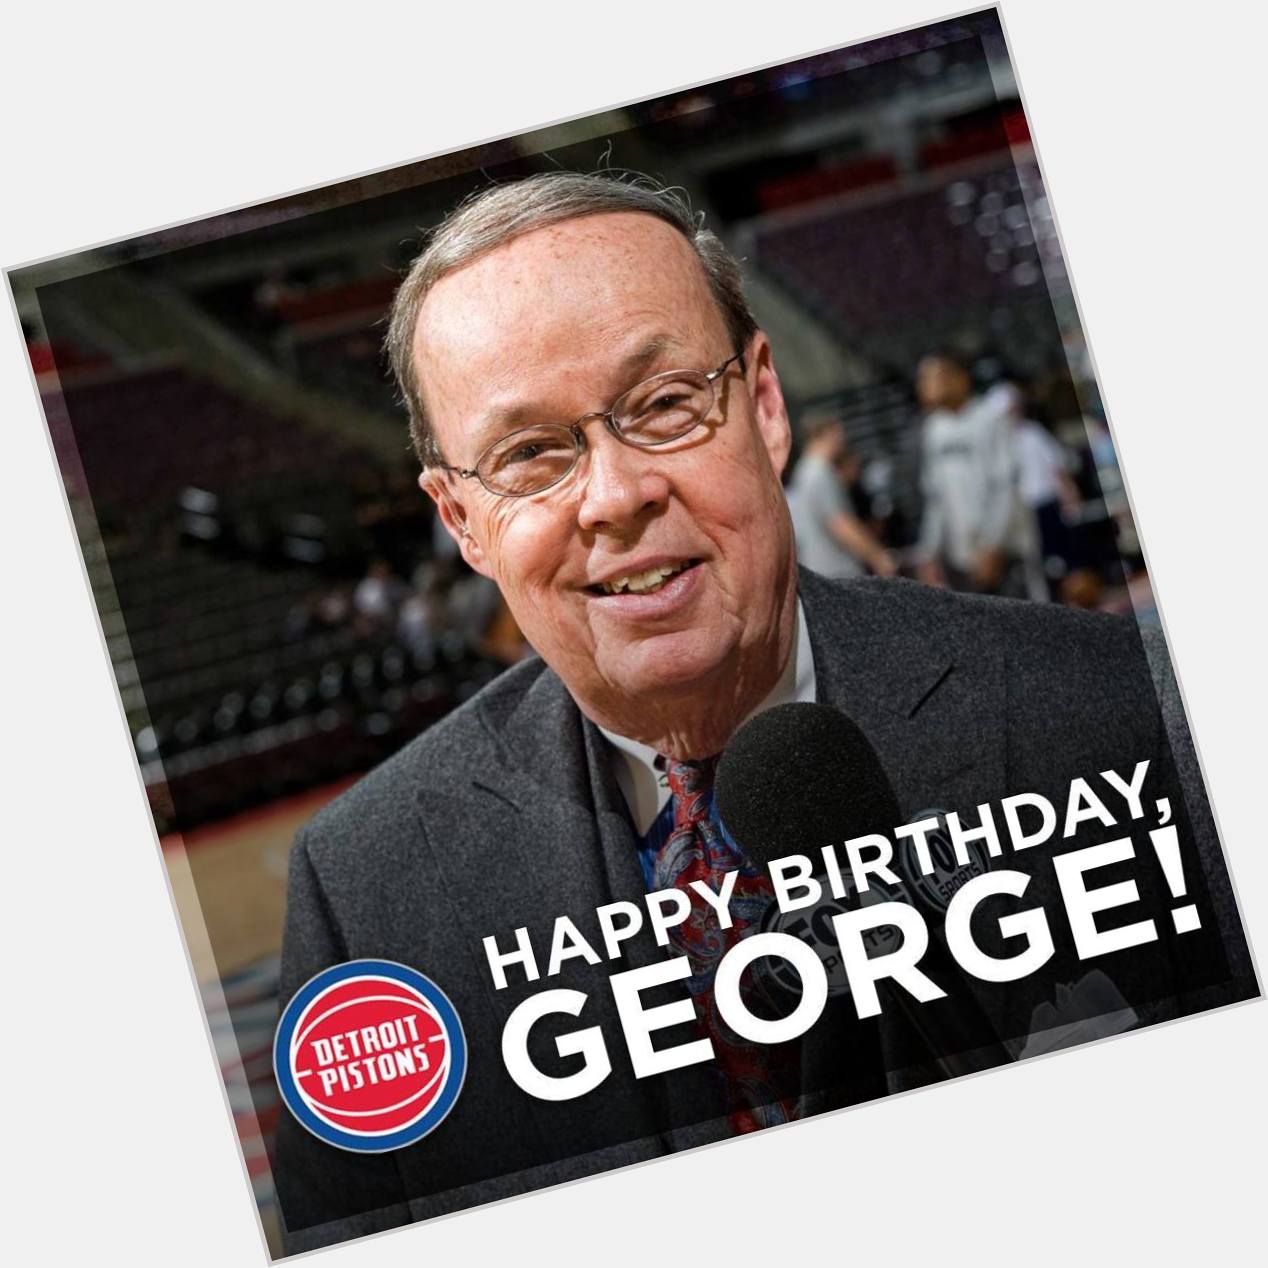 Join us in wishing a Happy Birthday to the legendary George Blaha!  